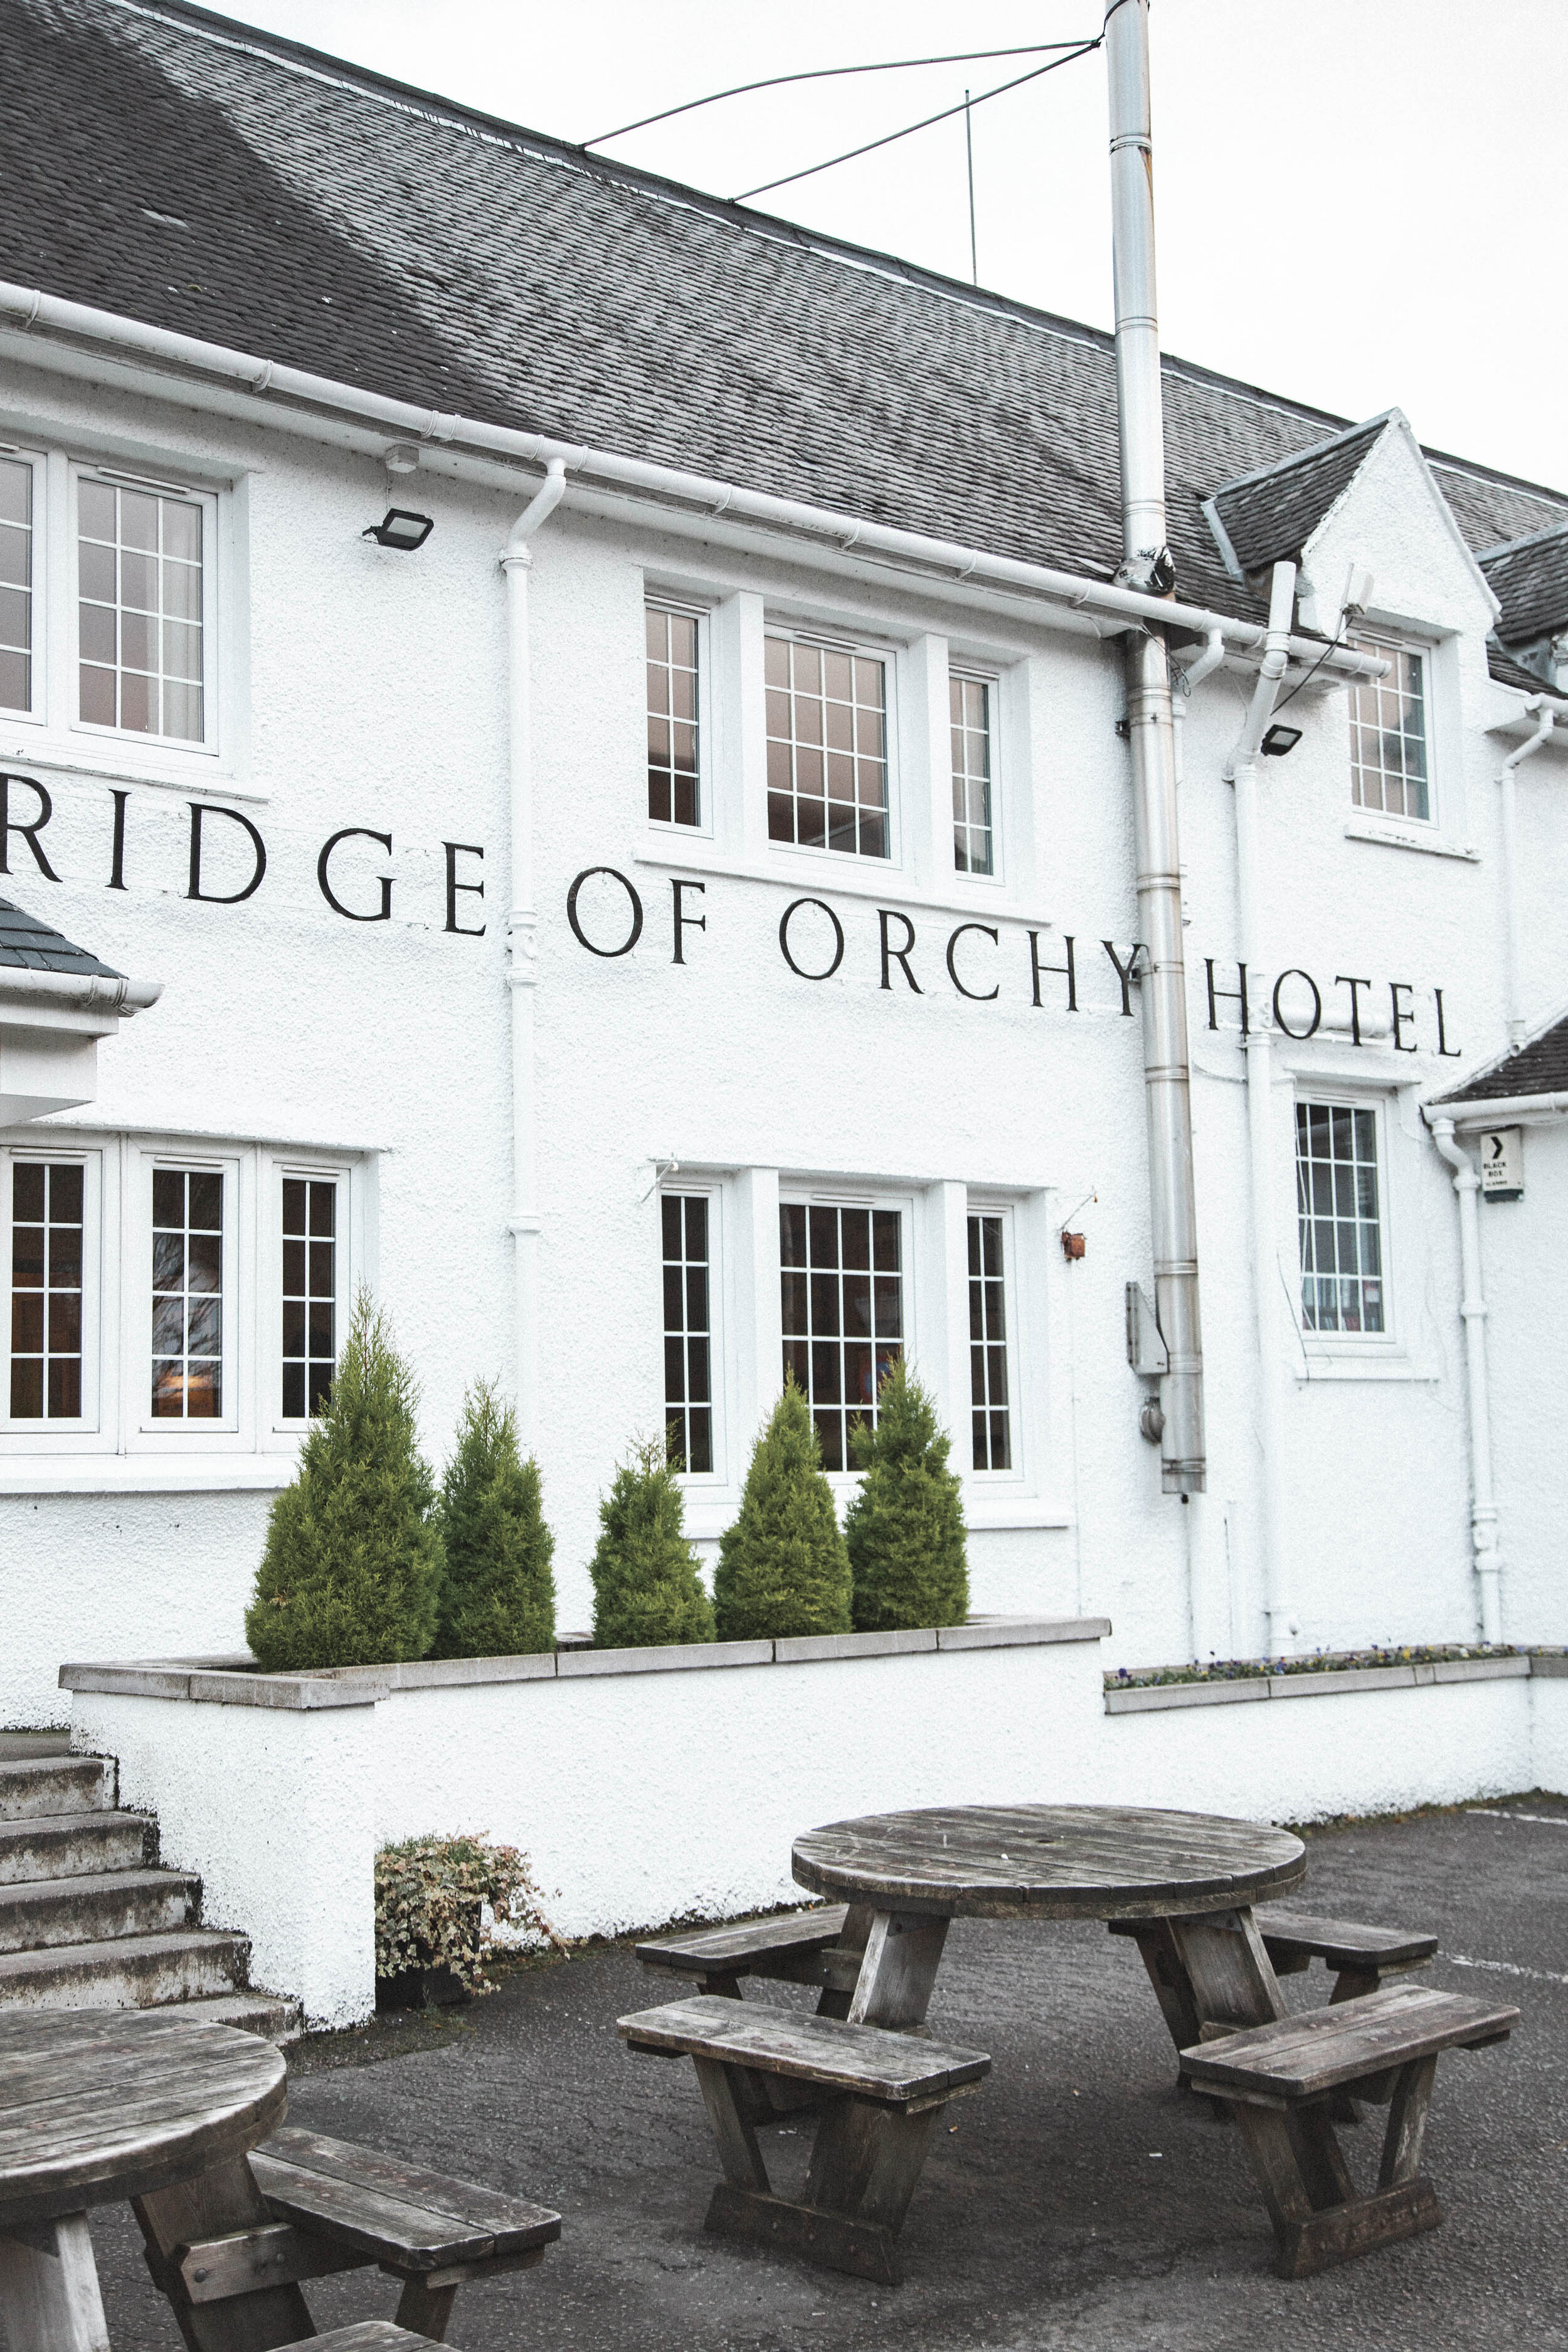 The Bridge of Orchy Hotel